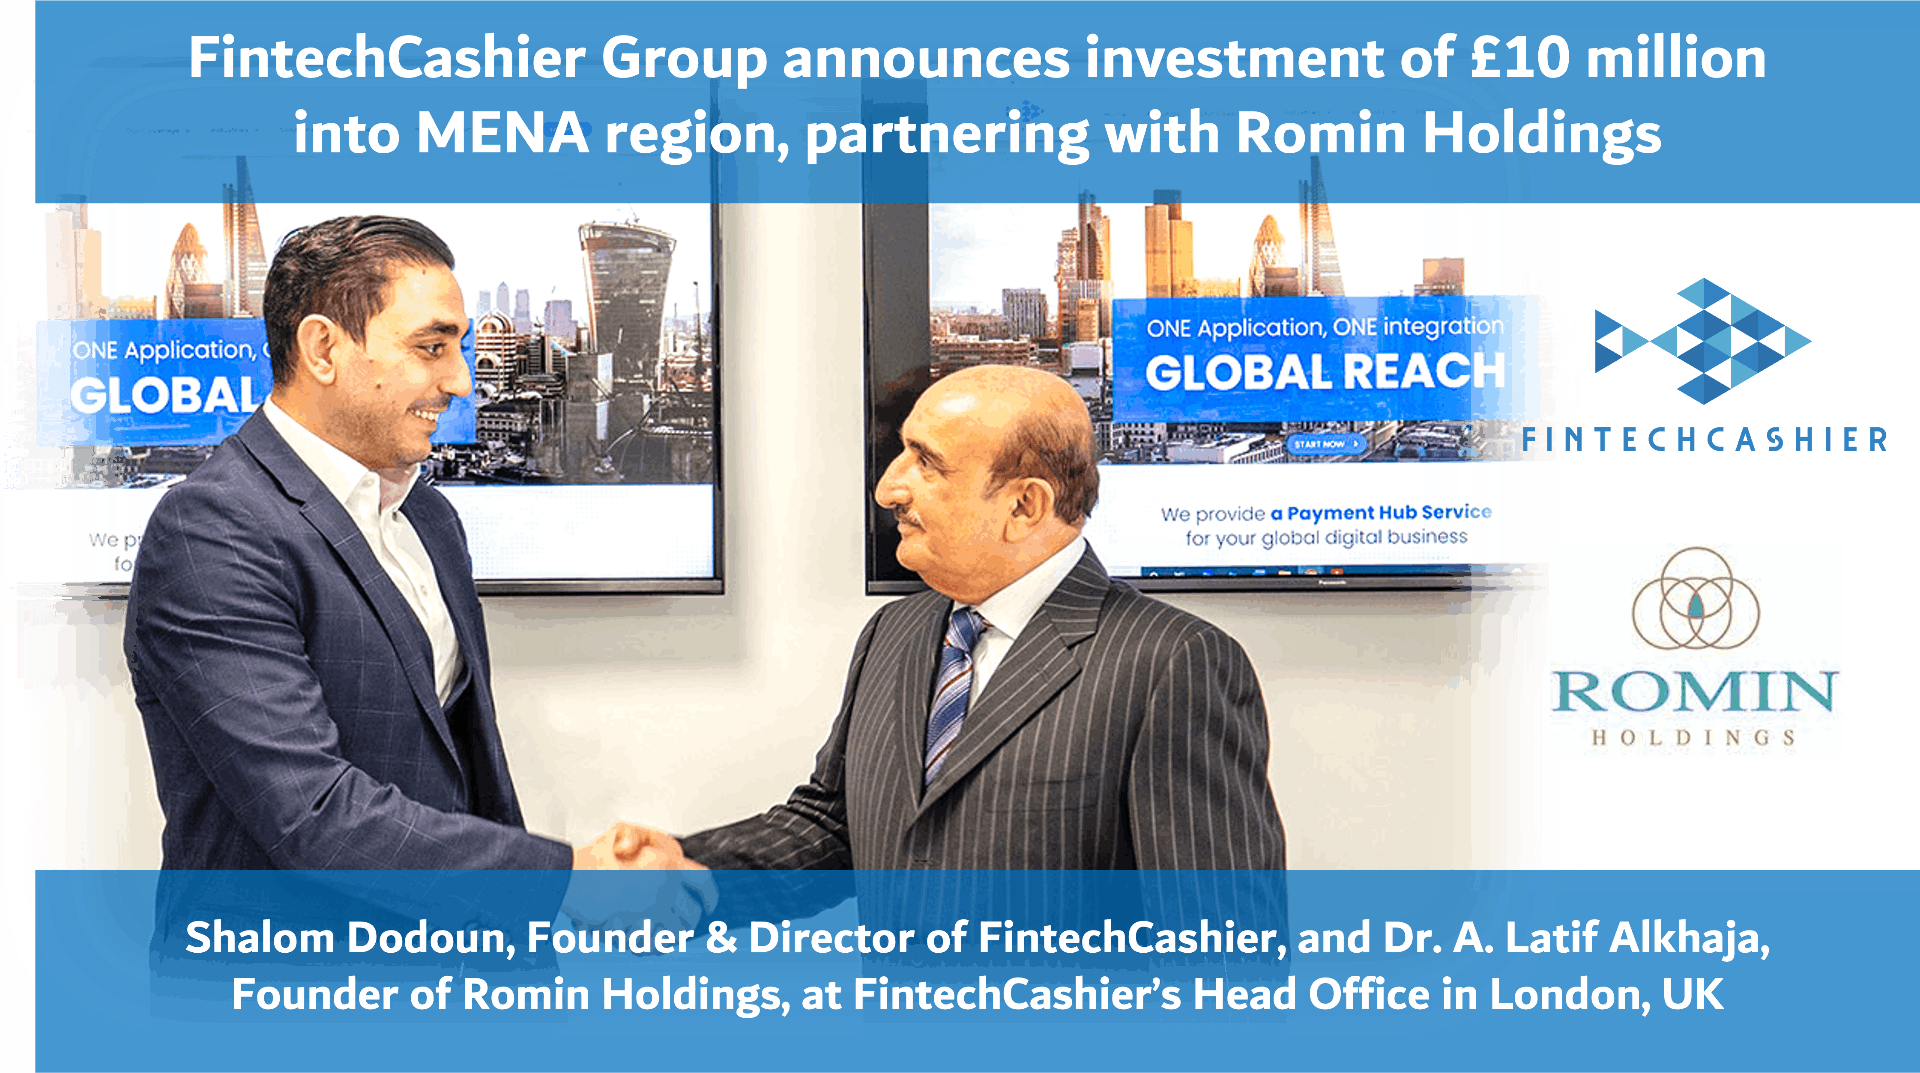 FintechCashier Group announces investment of £10 million into MENA region, creating a financial gateway centre based in Bahrain